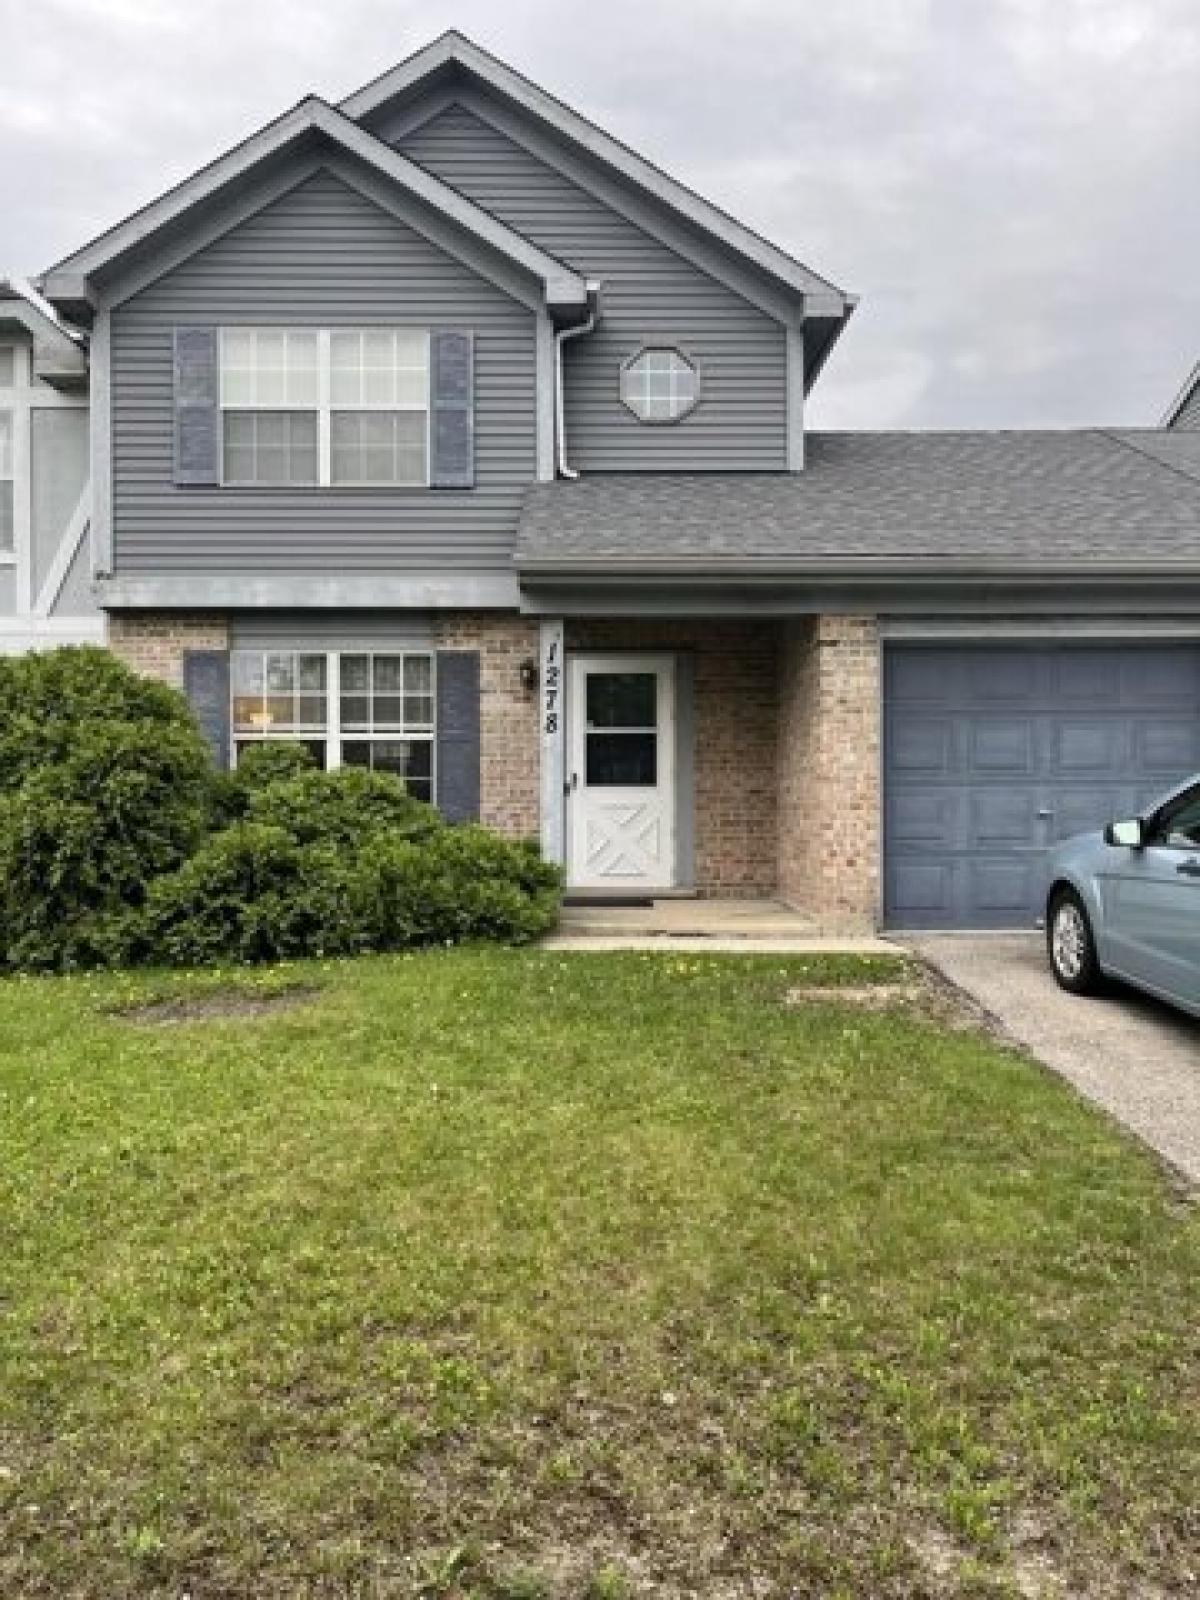 Picture of Home For Sale in Carol Stream, Illinois, United States